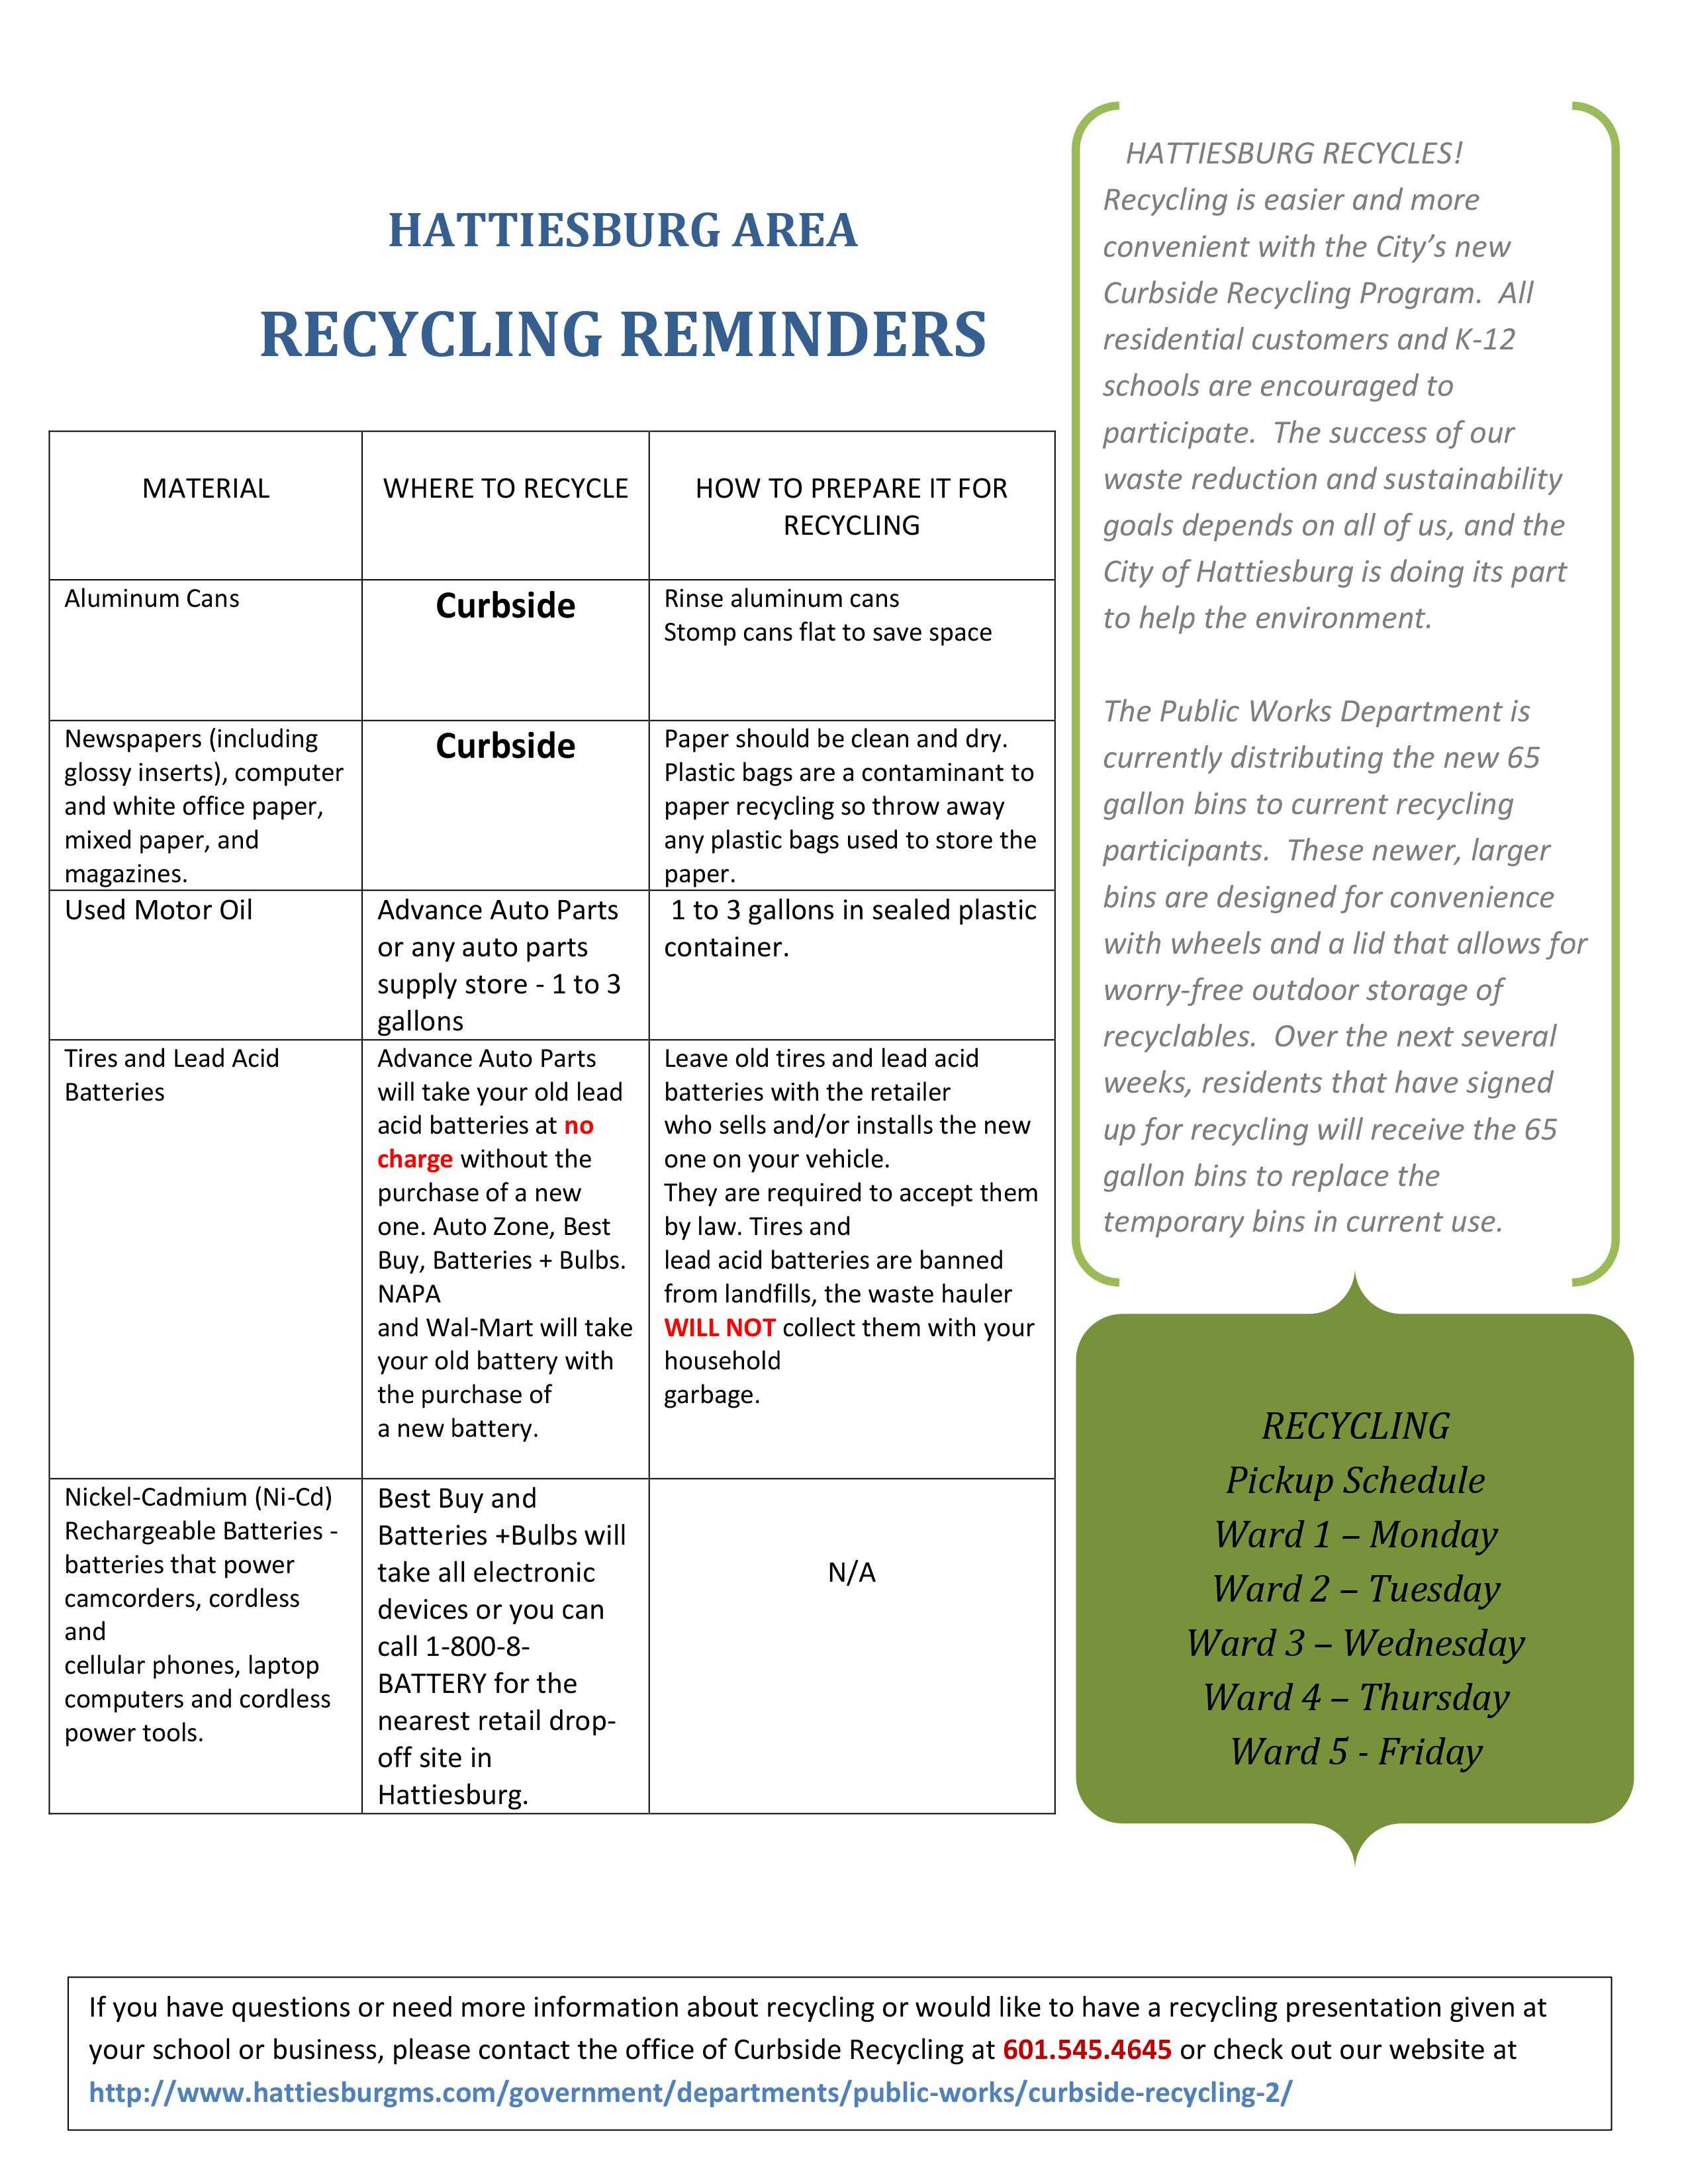 Curbside recycling business plan